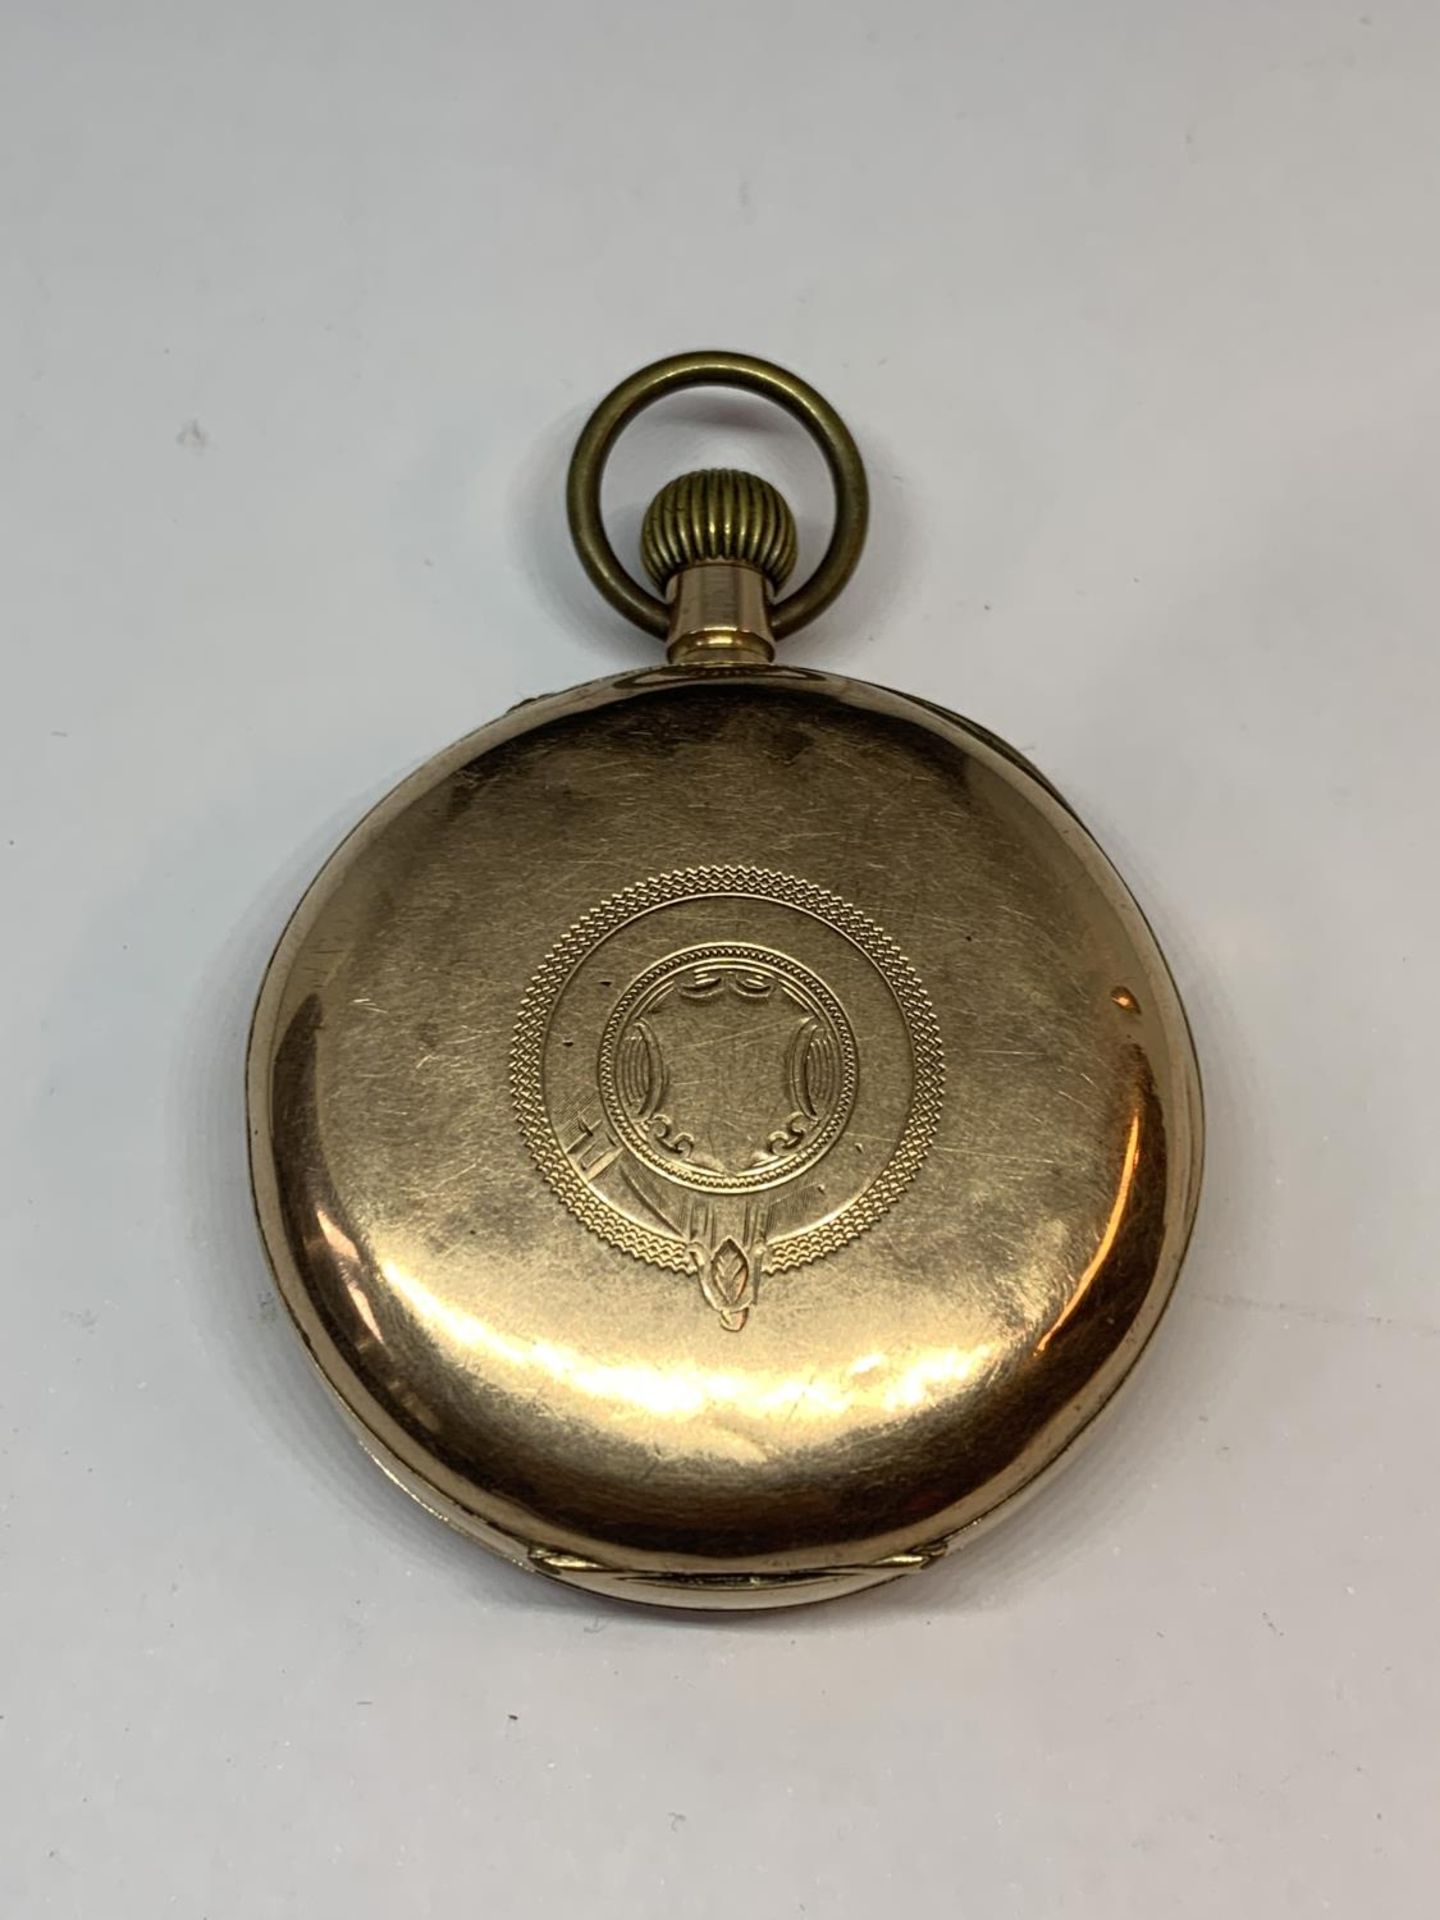 A GENTLEMANS 9CT GOLD OPEN FACED POCKET WATCH GROSS WEIGHT 90.38 GRAMS WITH LEVER ESCAPEMENT AND A - Image 2 of 4